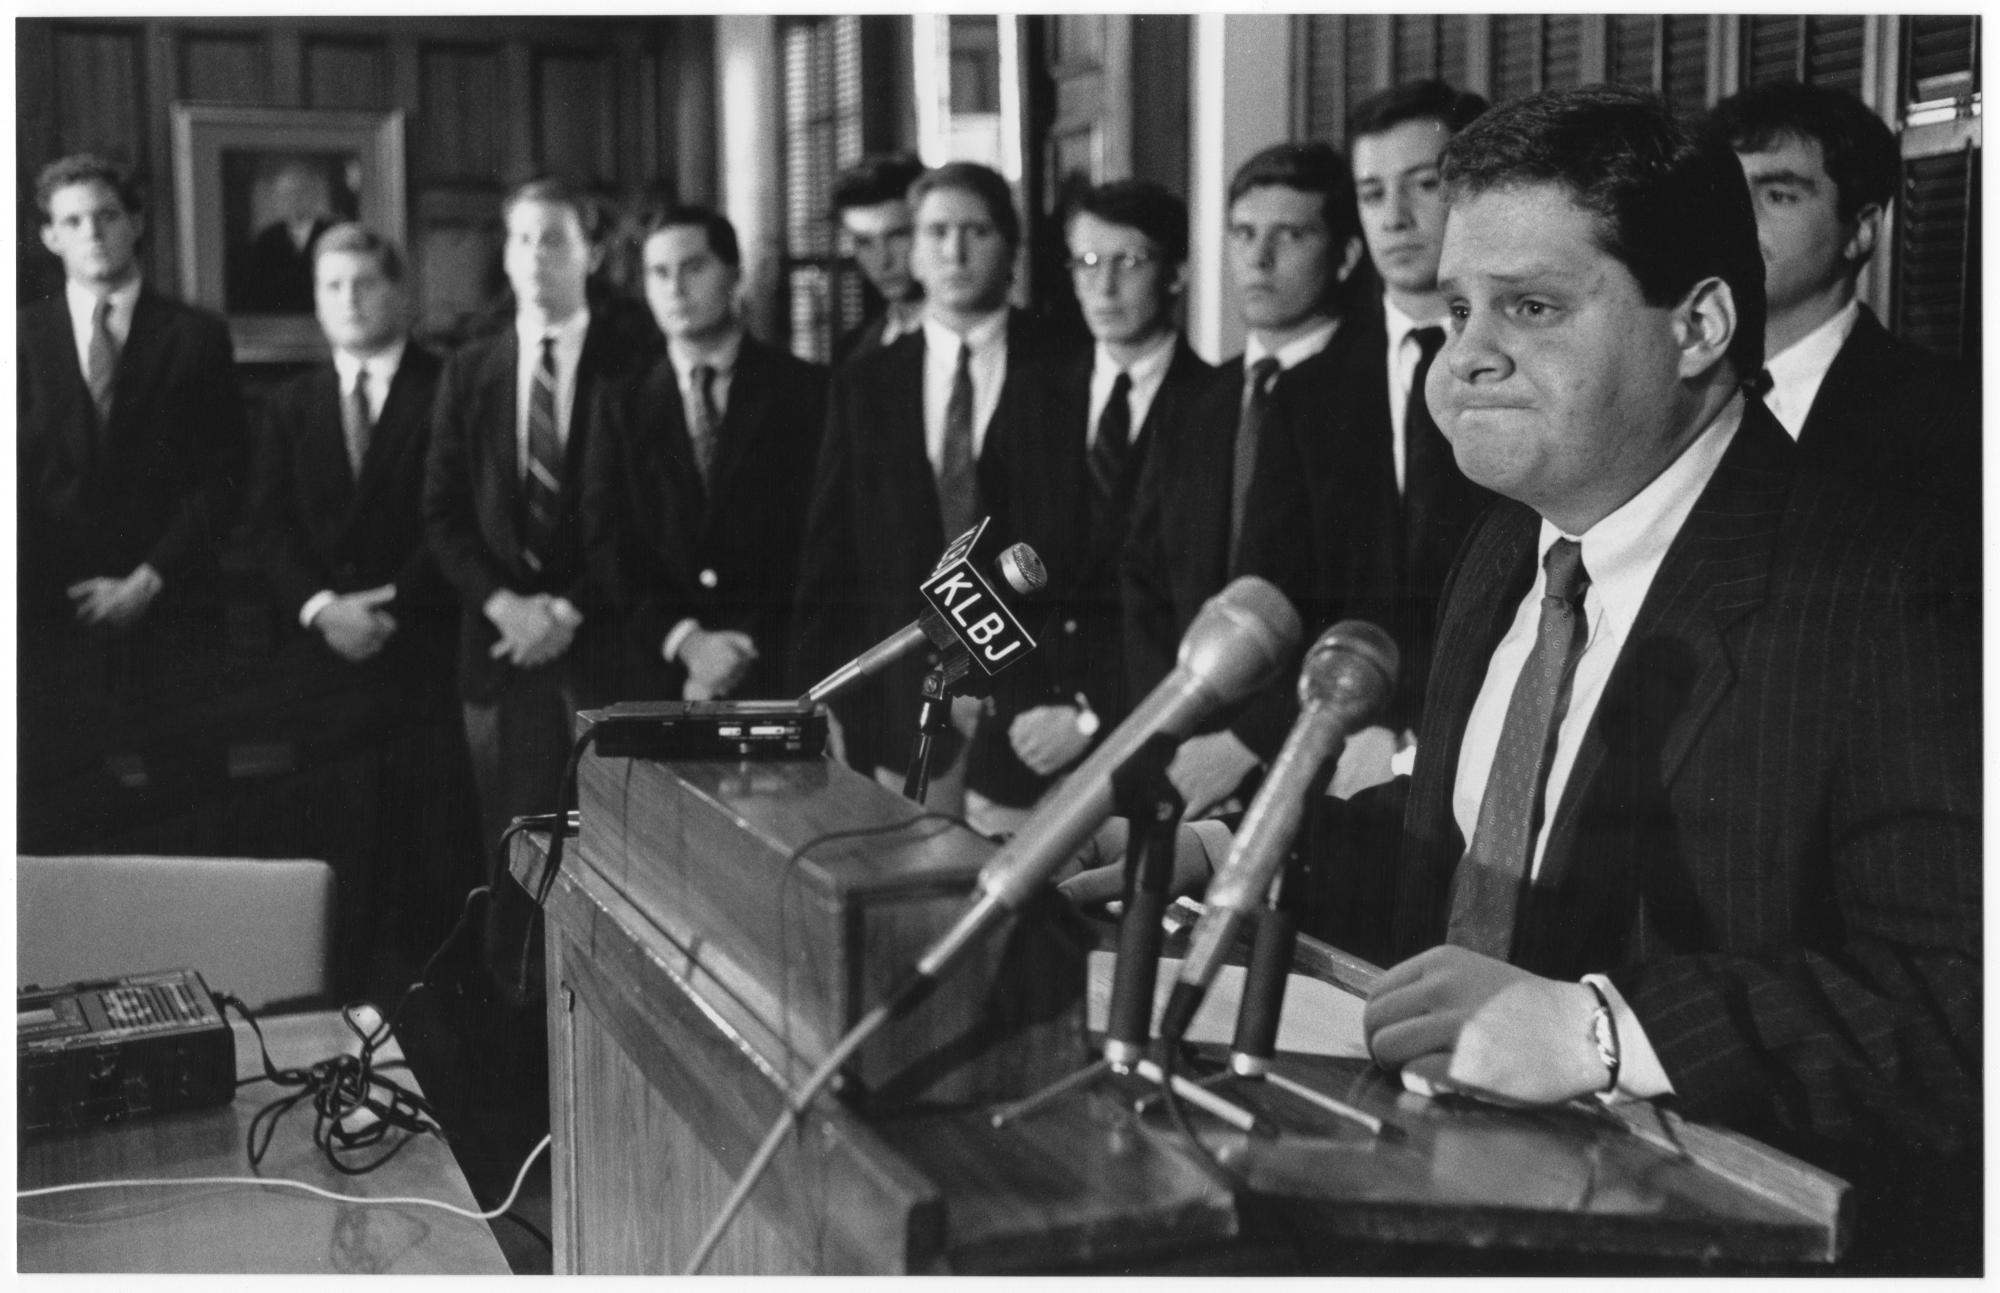 Daily Texan (1990 #2) - Fraternity Press Conference